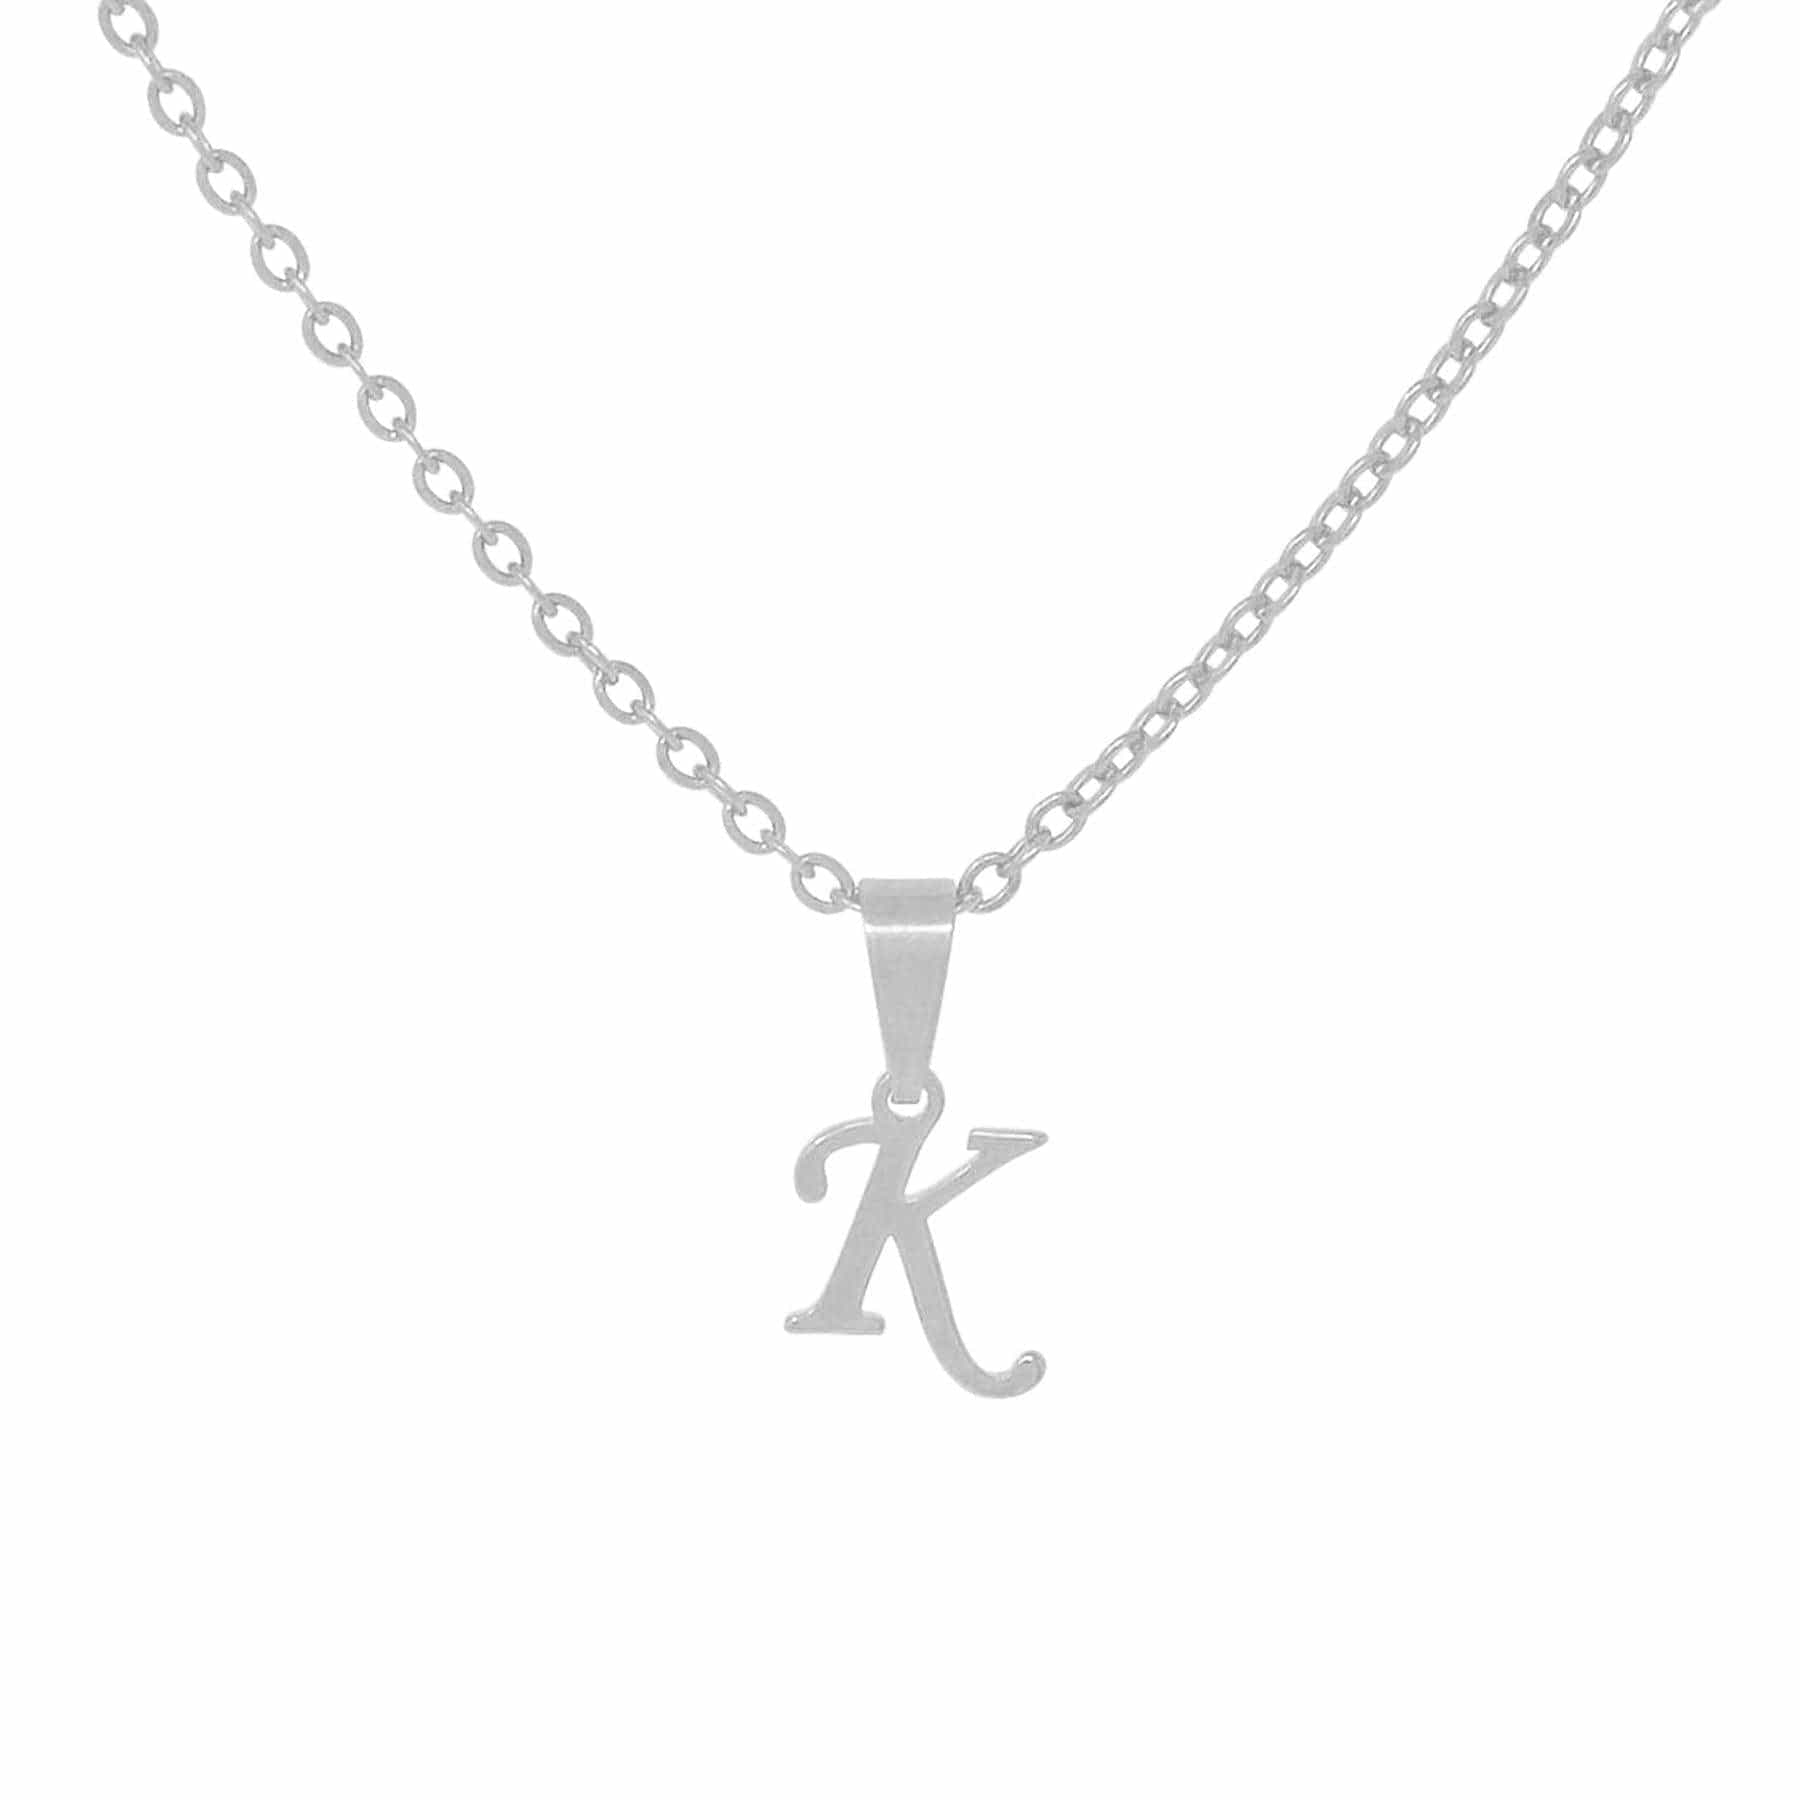 BohoMoon Stainless Steel Petite Initial Choker / Necklace Silver / A / Choker